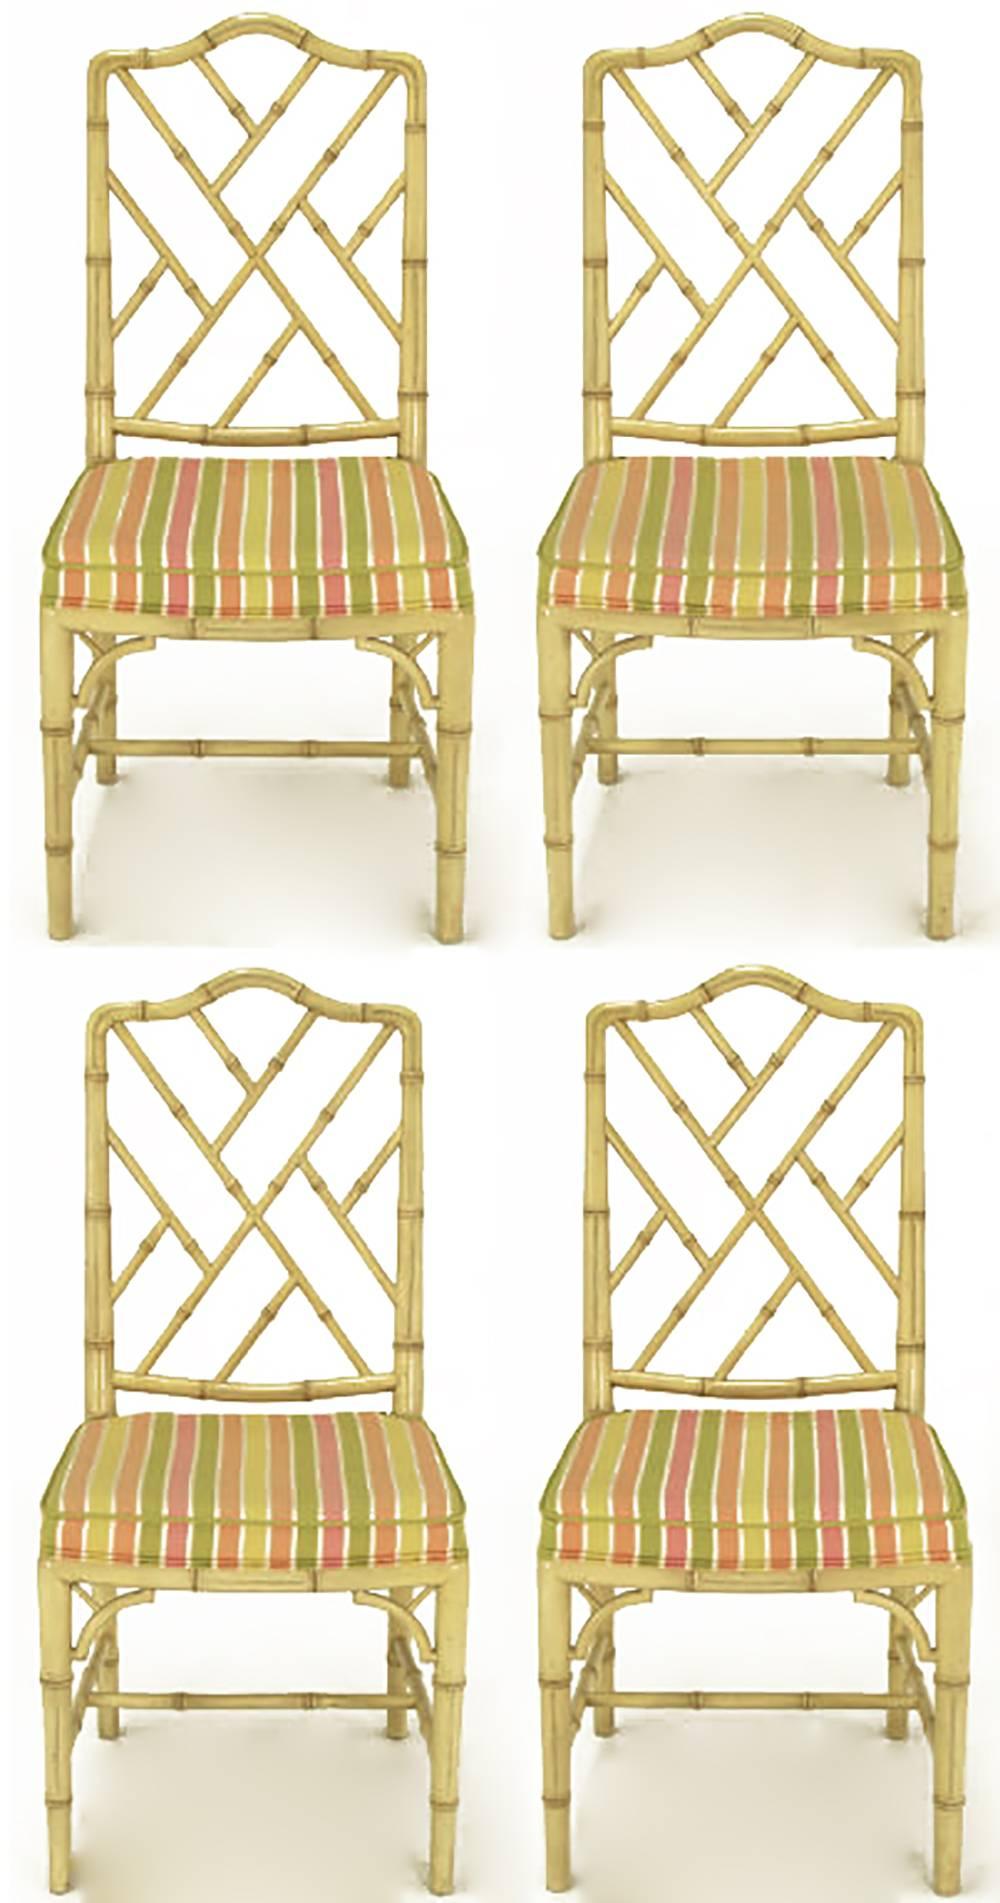 Set of four Kindel furniture of Grand Rapids Chinese Chippendale dining chairs in antique ivory lacquer with original vibrant silk stripe upholstery. Faux bamboo frames with arched back and bracketed front legs.
Kindel Furniture, for over 100